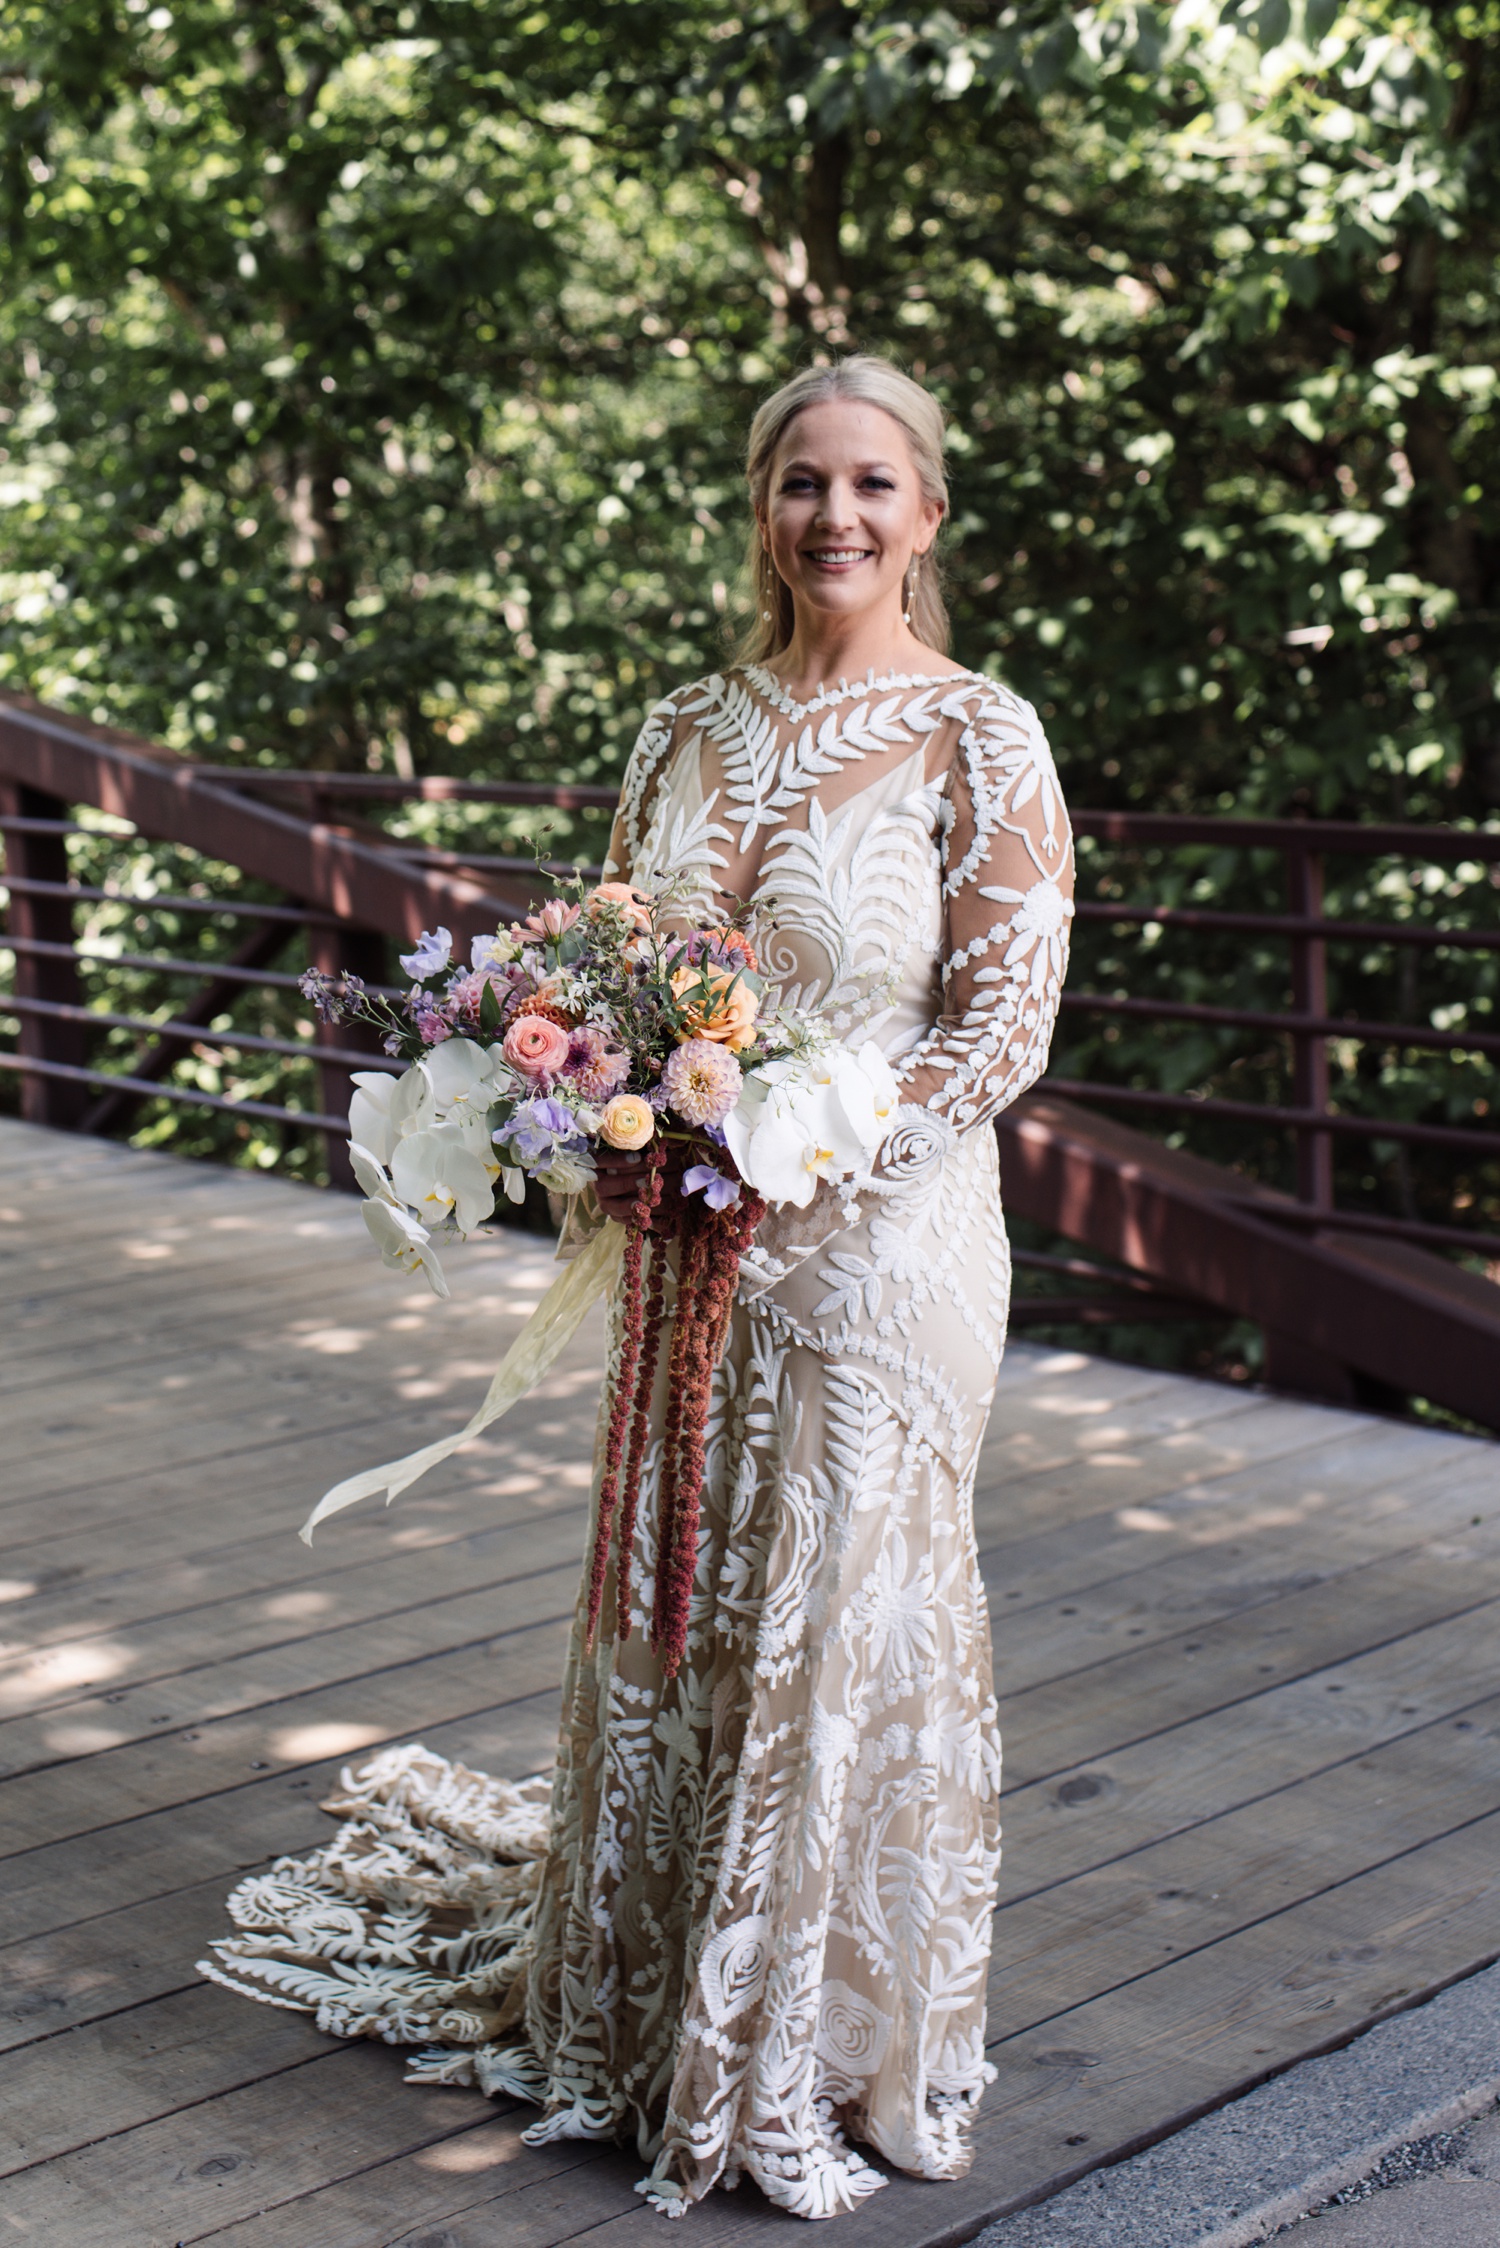 Bride in a long-sleeved wedding gown with lace cut-out details by Rue de Seine